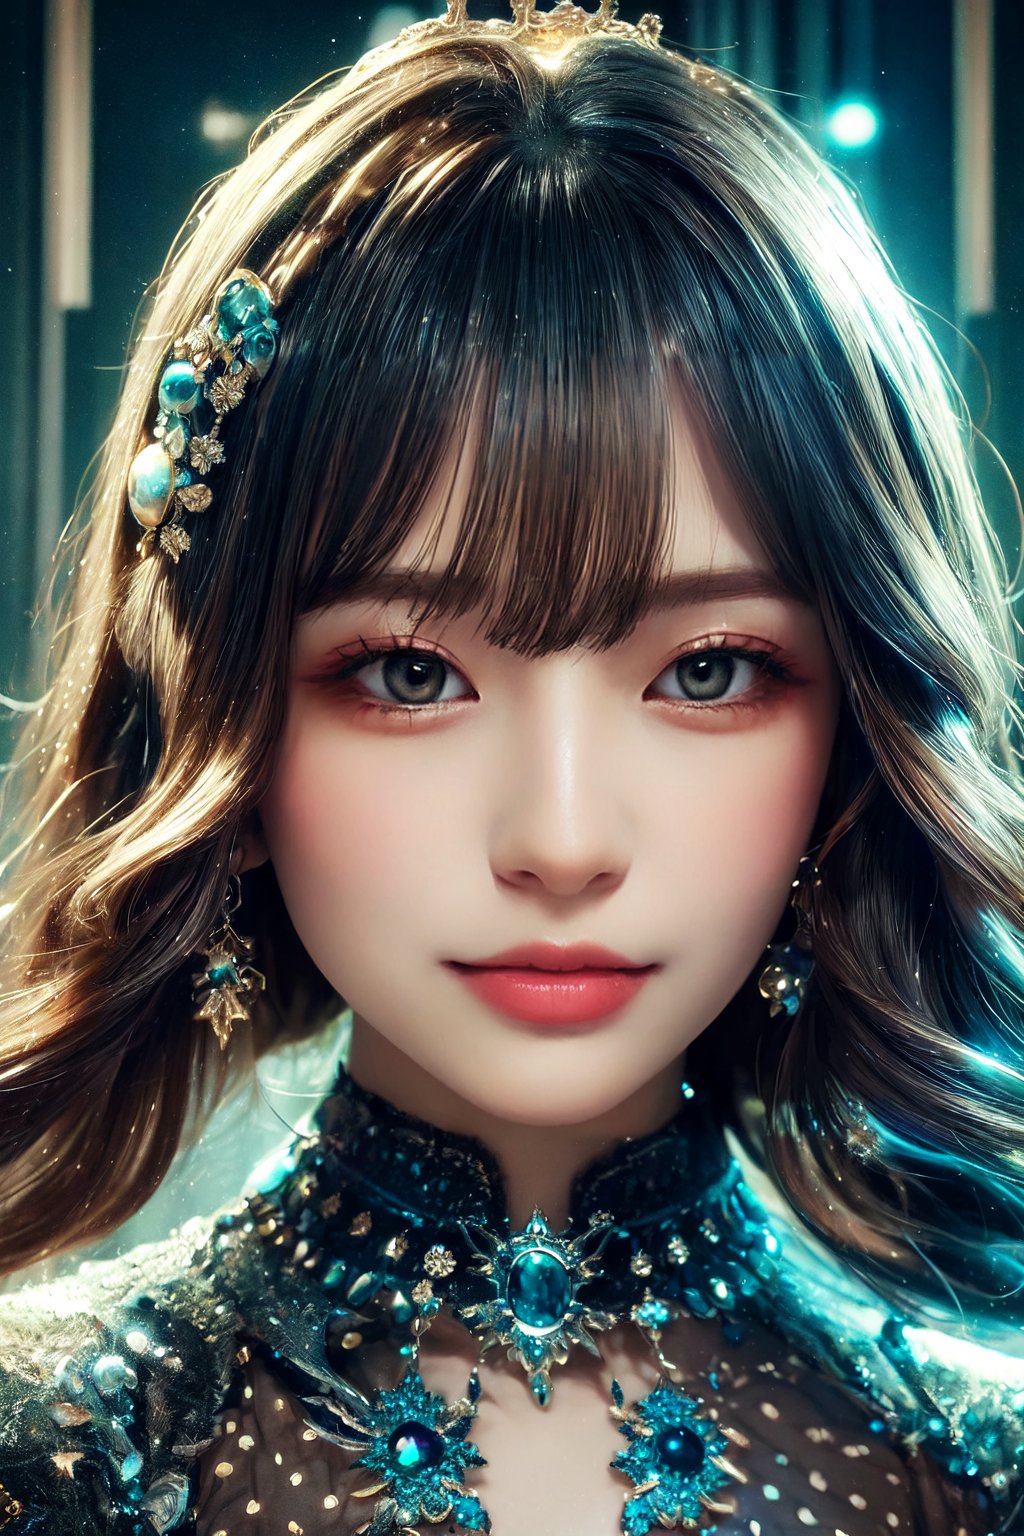 (masterpiece, high quality:1.5), 8K, HDR, 
1girl, well_defined_face, well_defined_eyes, ultra_detailed_eyes, ultra_detailed_face, by FuturEvoLab, 
ethereal lighting, immortal, elegant, porcelain skin, jet-black hair, waves, pale face, ice-blue eyes, blood-red lips, pinhole photograph, retro aesthetic, monochromatic backdrop, mysterious, enigmatic, timeless allure, the siren of the night, secrets, longing, hidden dangers, captivating, nostalgia, timeless fascination, Edge feathering and holy light, Exquisite face, Exquisite face